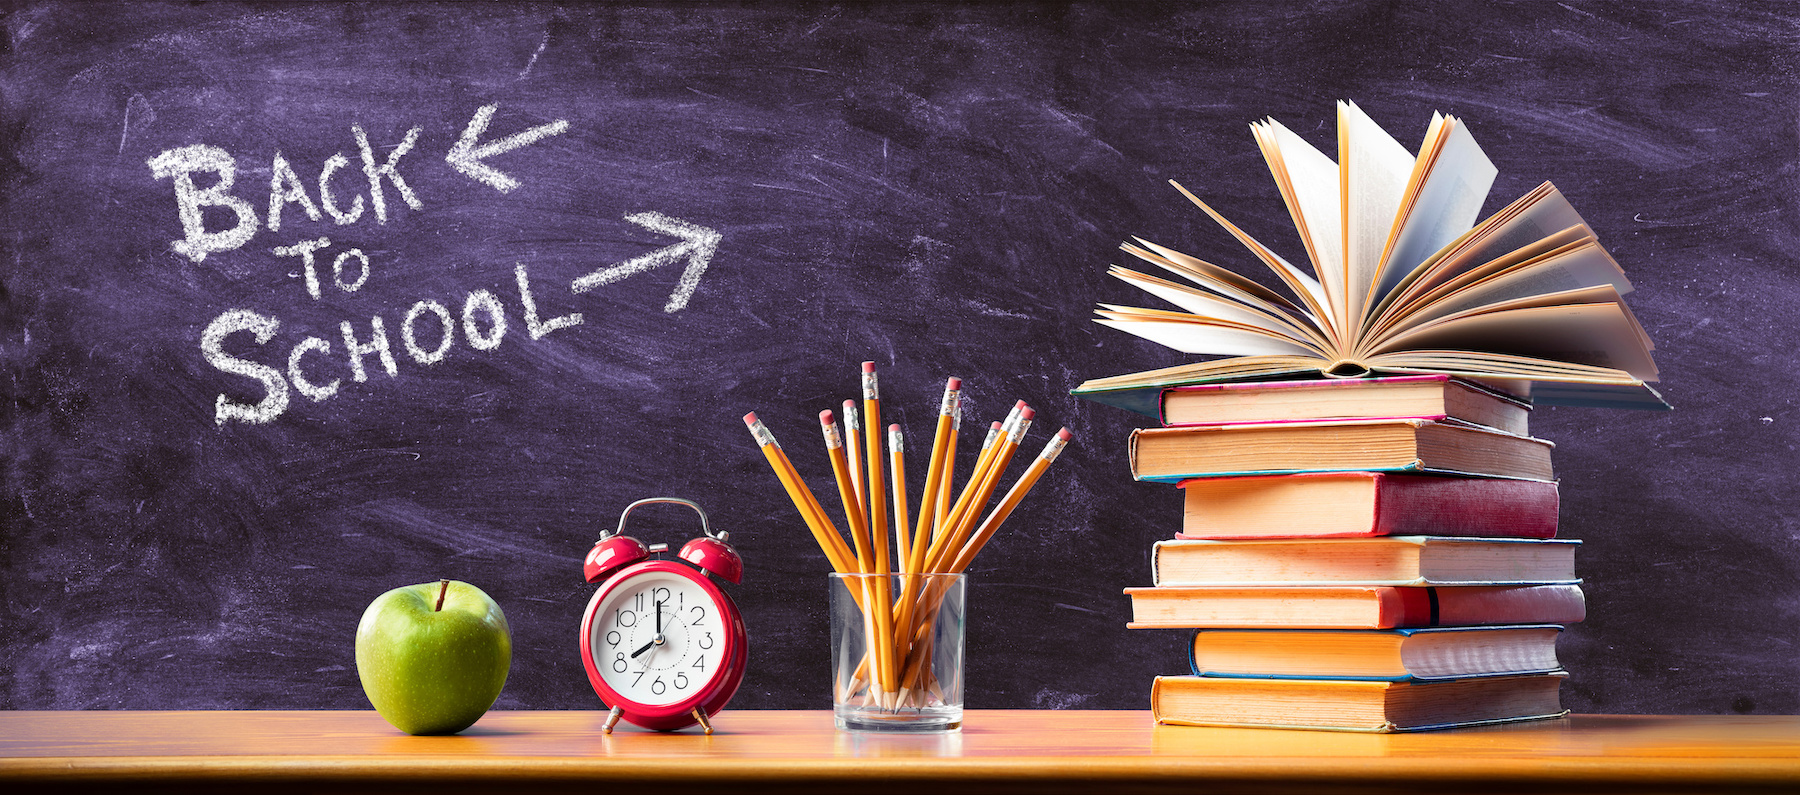 typical school items such as an apple pencils alarm clock and a stack of books are sitting on a wooden table in front of a chalkboard with back to school written on it in white chalk